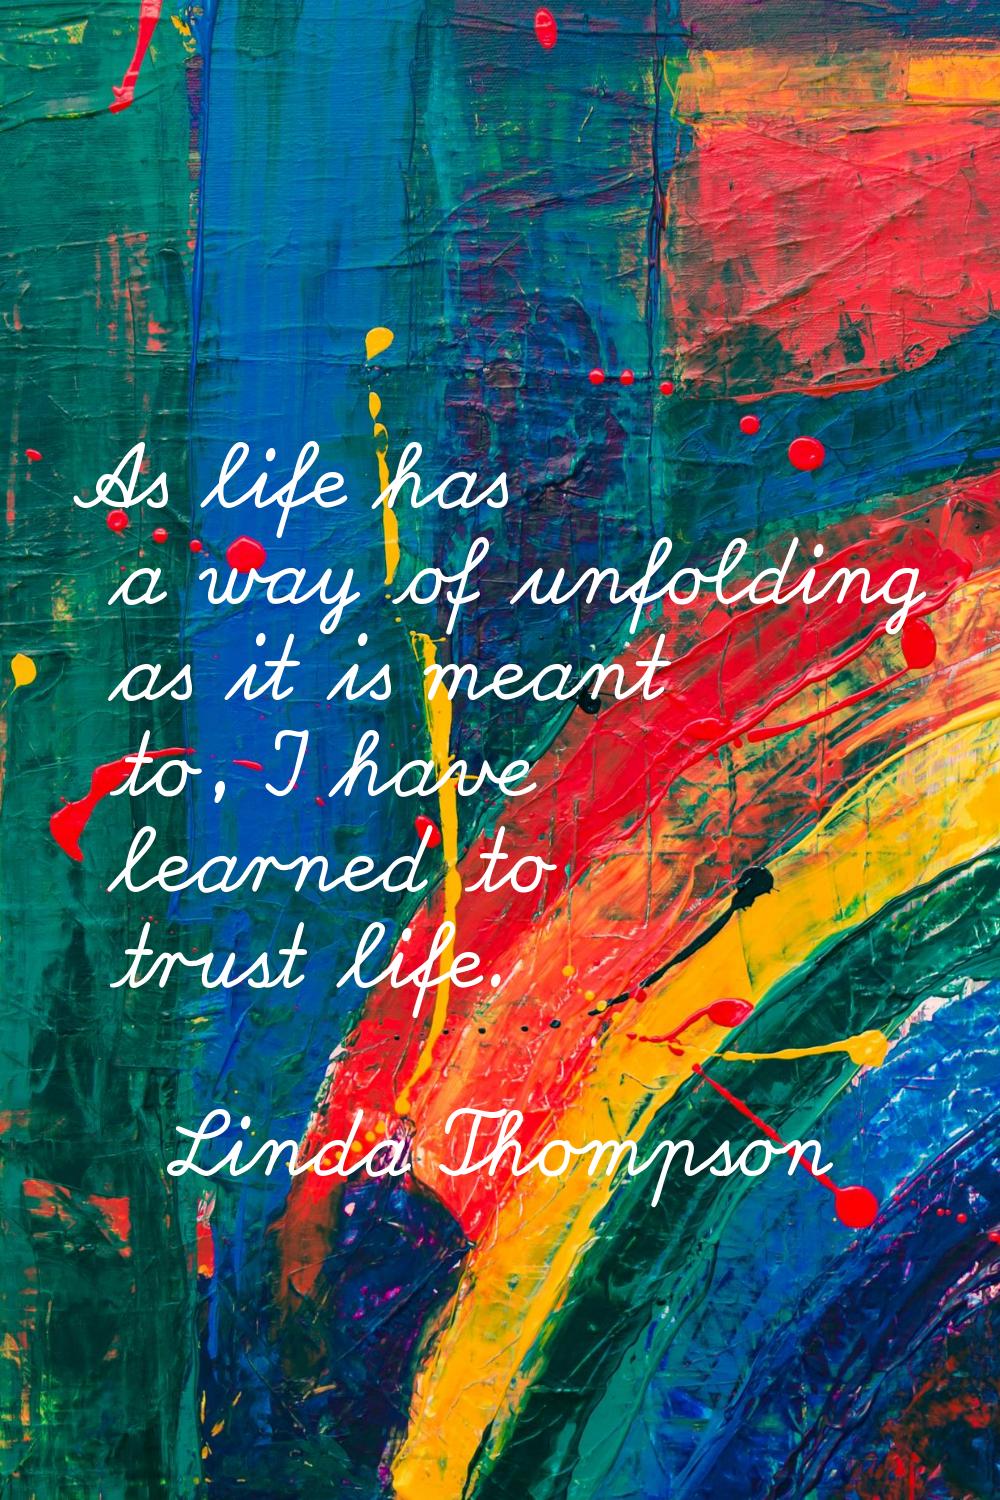 As life has a way of unfolding as it is meant to, I have learned to trust life.